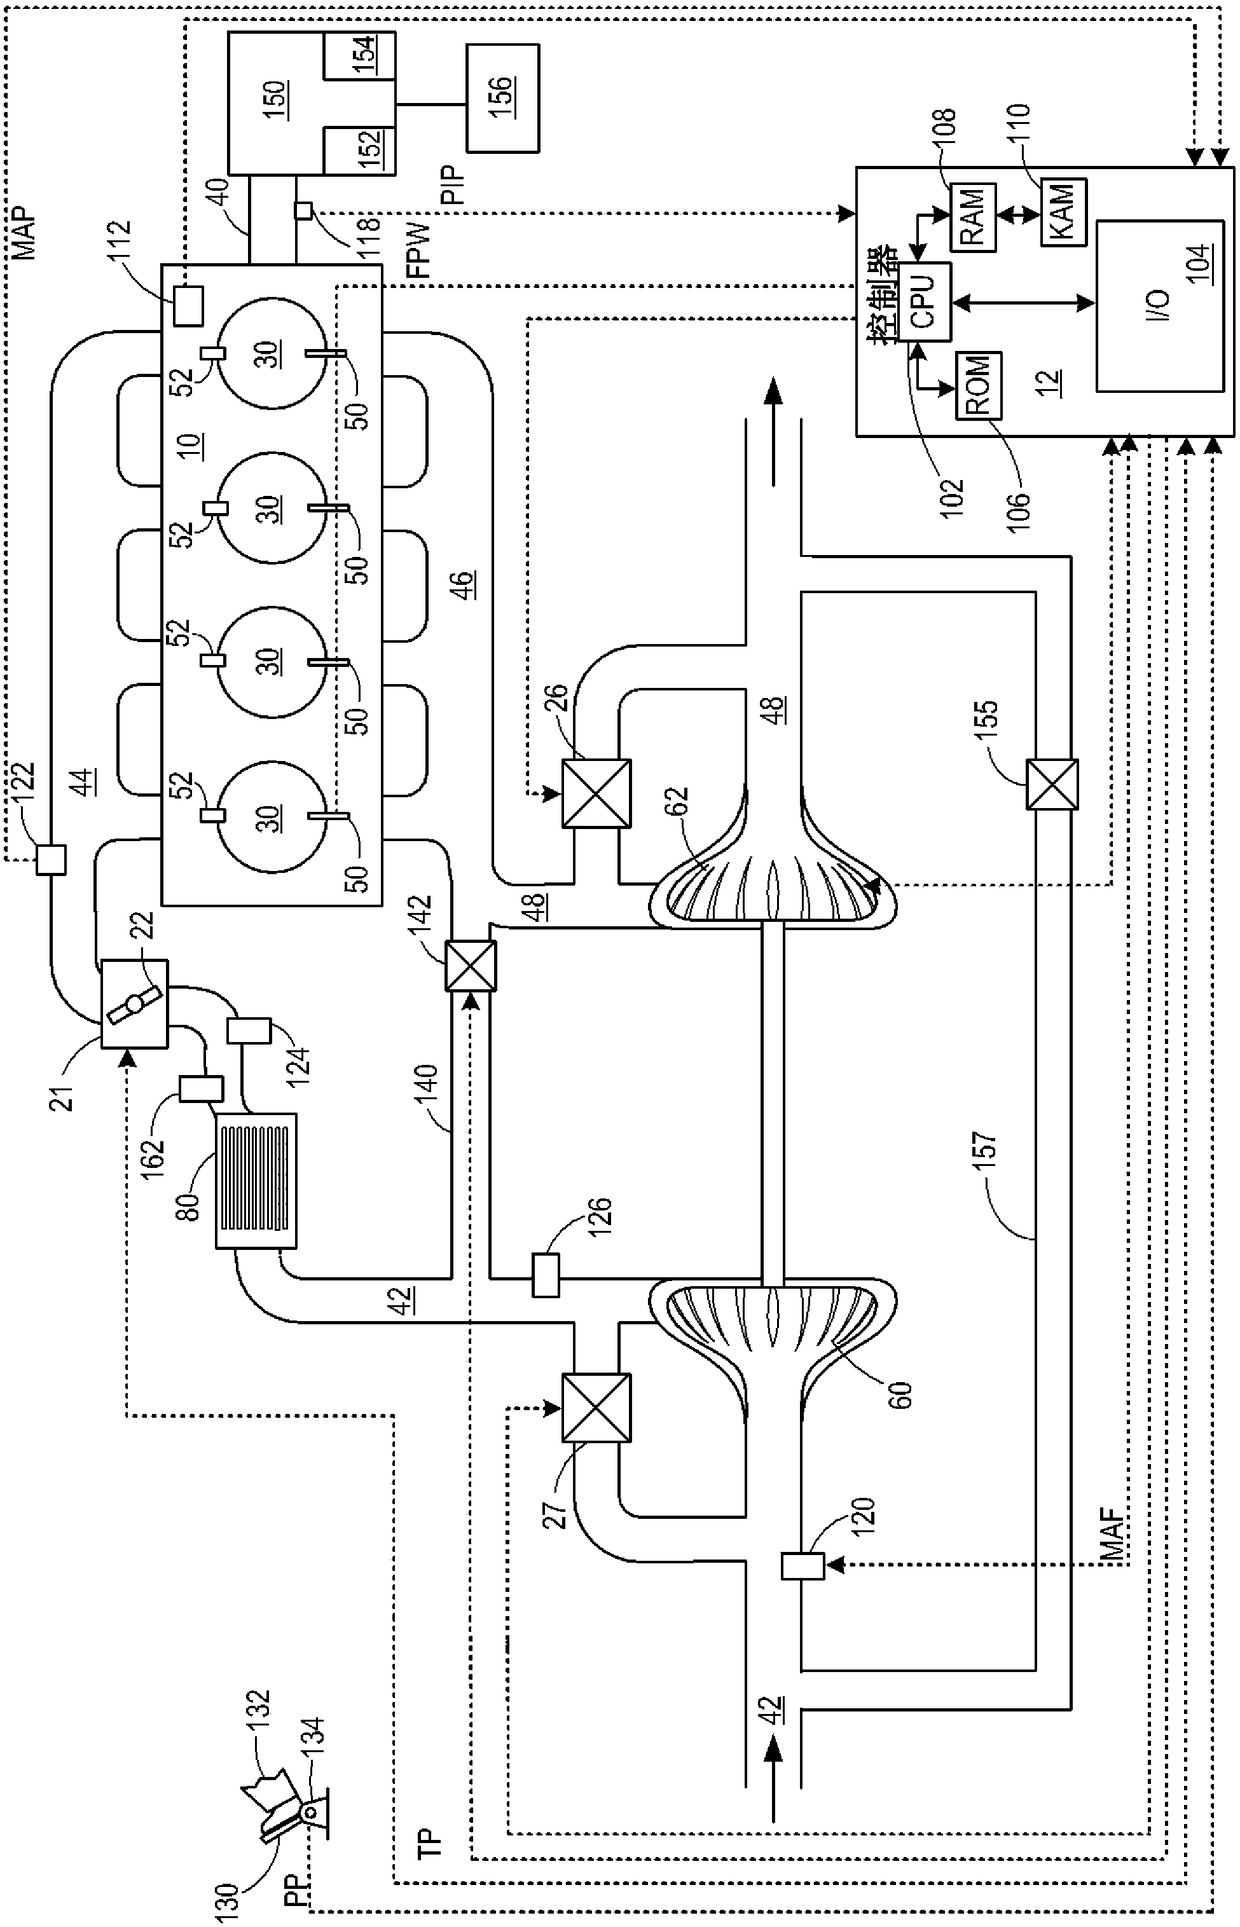 Method and system for indicating water at an oxygen sensor based on sensor heater power consumption